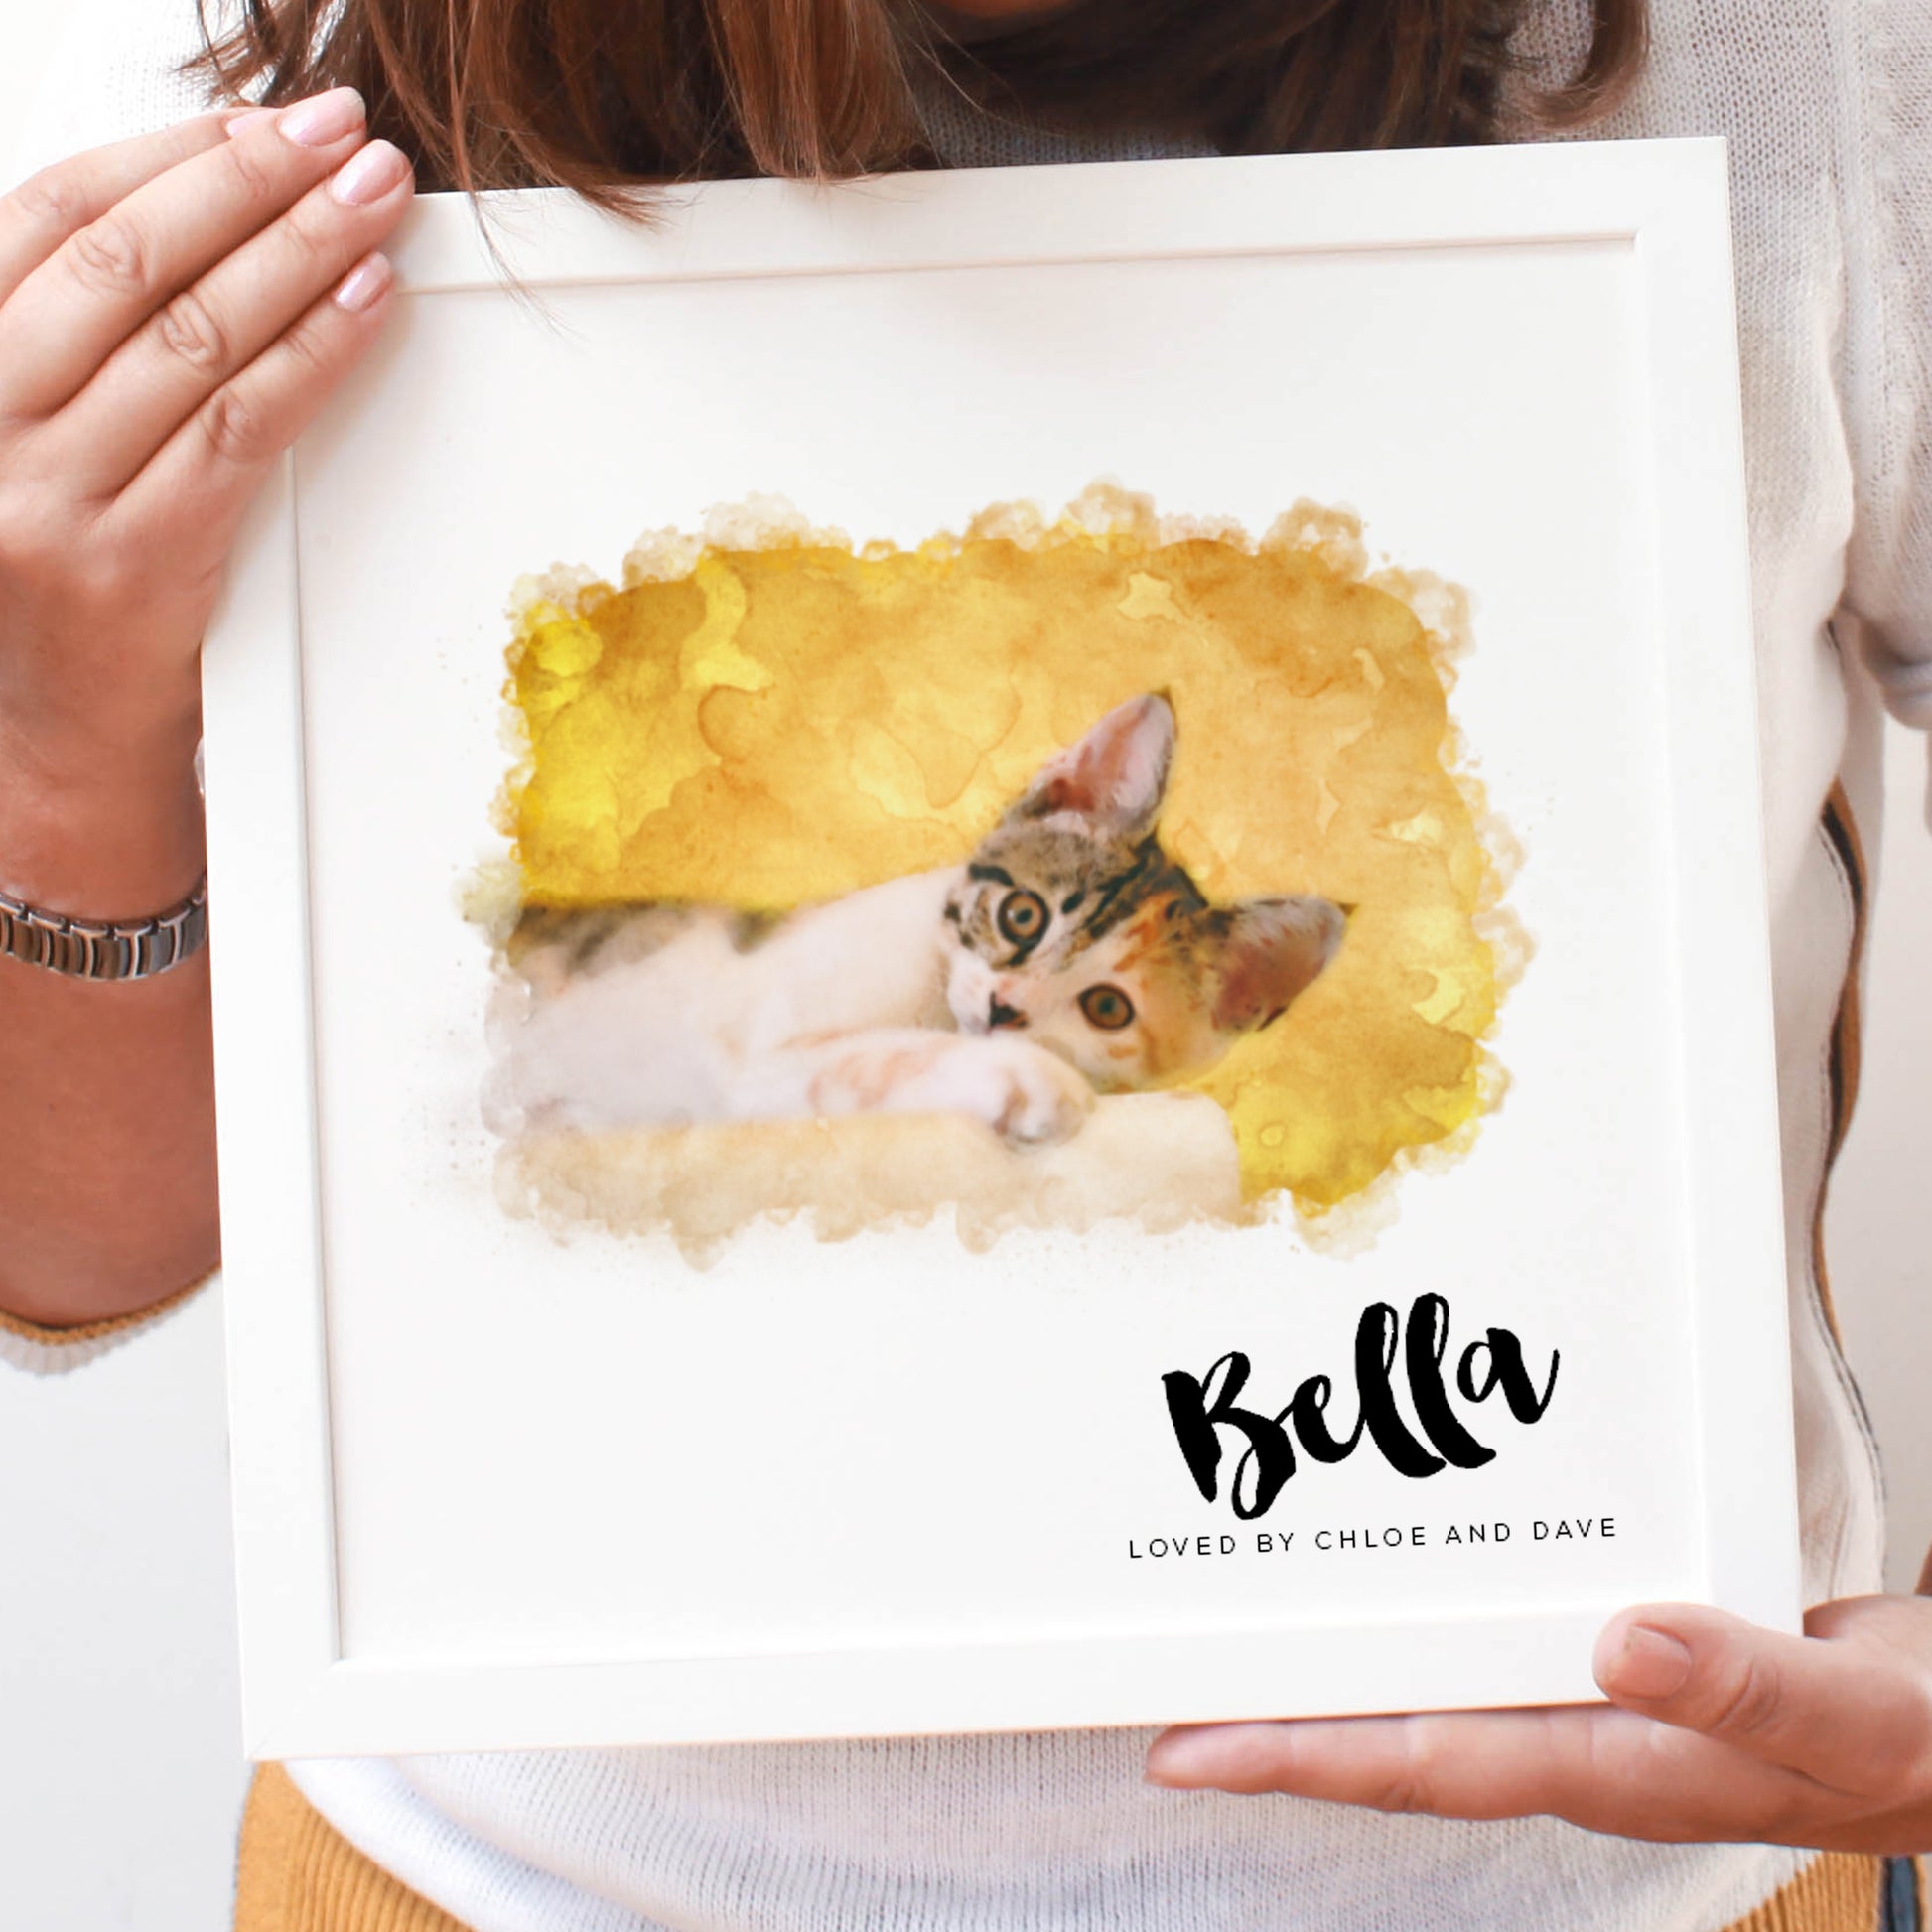 watercolour illustration of white and tabby cat in a square white frame